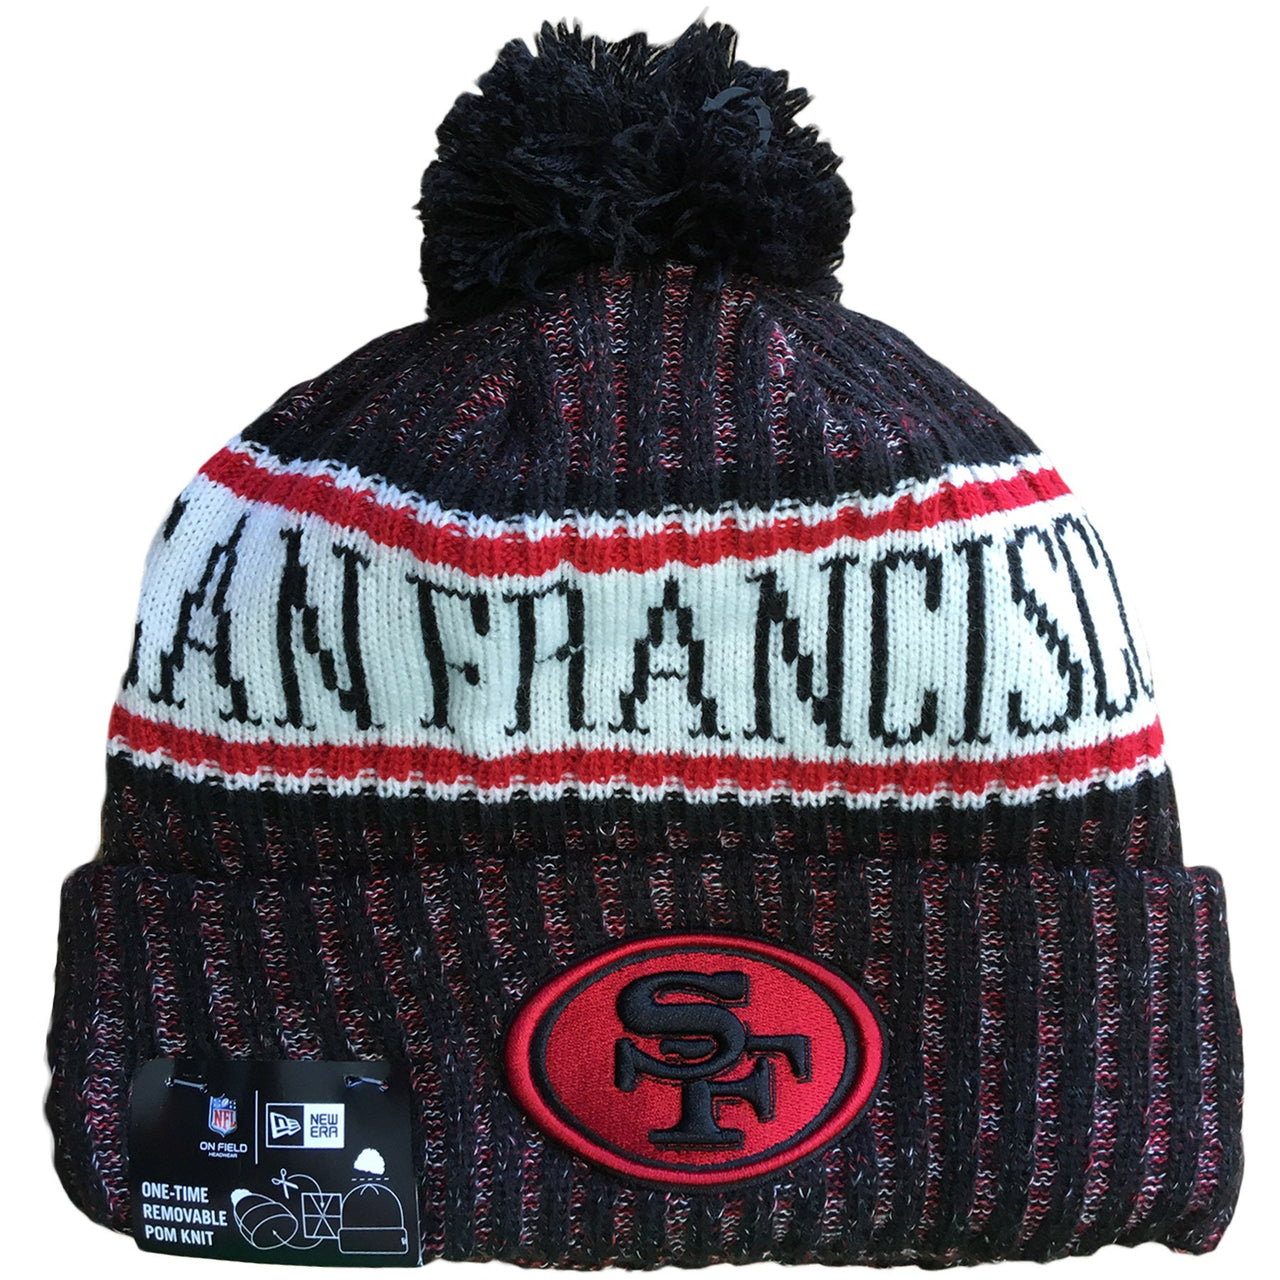 Embroidered on the front of the 2018 Cold Weather San Francisco On Field Sideline Winter Beanie is the San Francisco 49ers logo embroidered in red and black